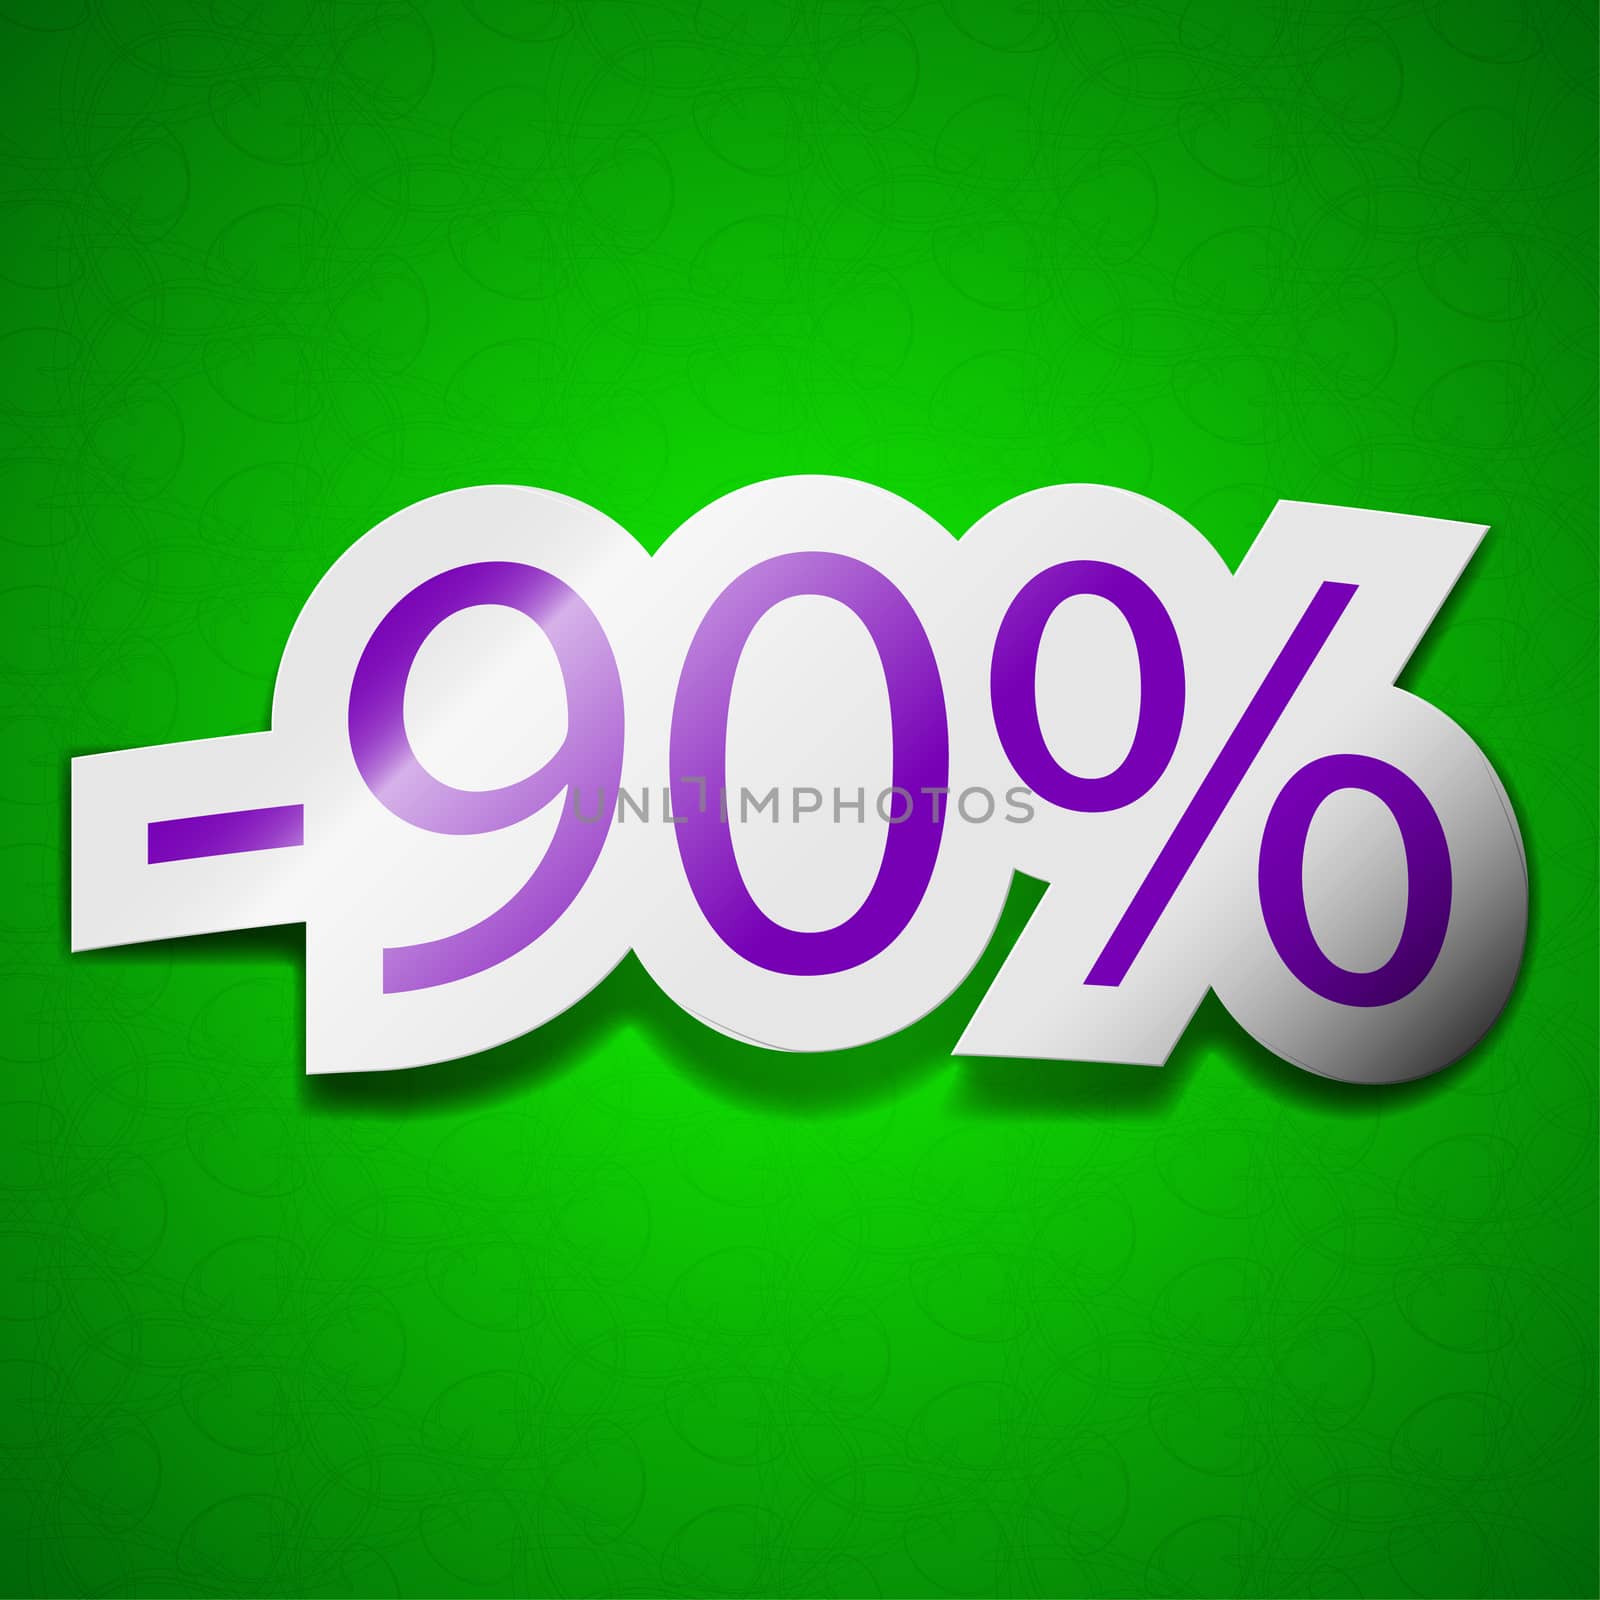 90 percent discount icon sign. Symbol chic colored sticky label on green background.  illustration